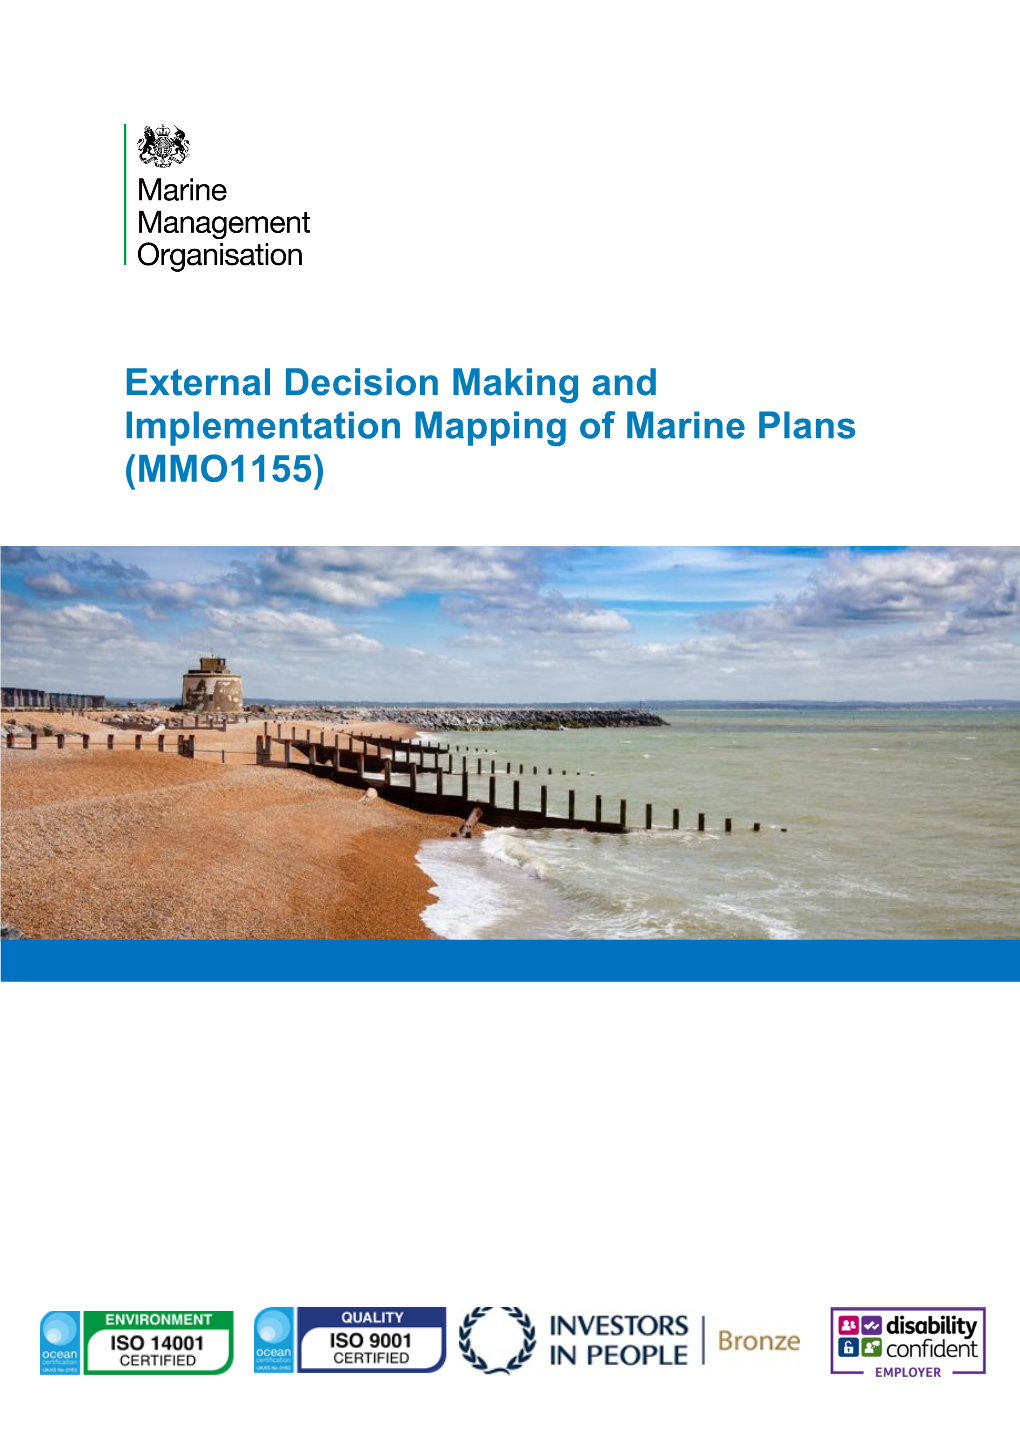 MMO1155: External Decision Making and Implementation Mapping of Marine Plans February 2019